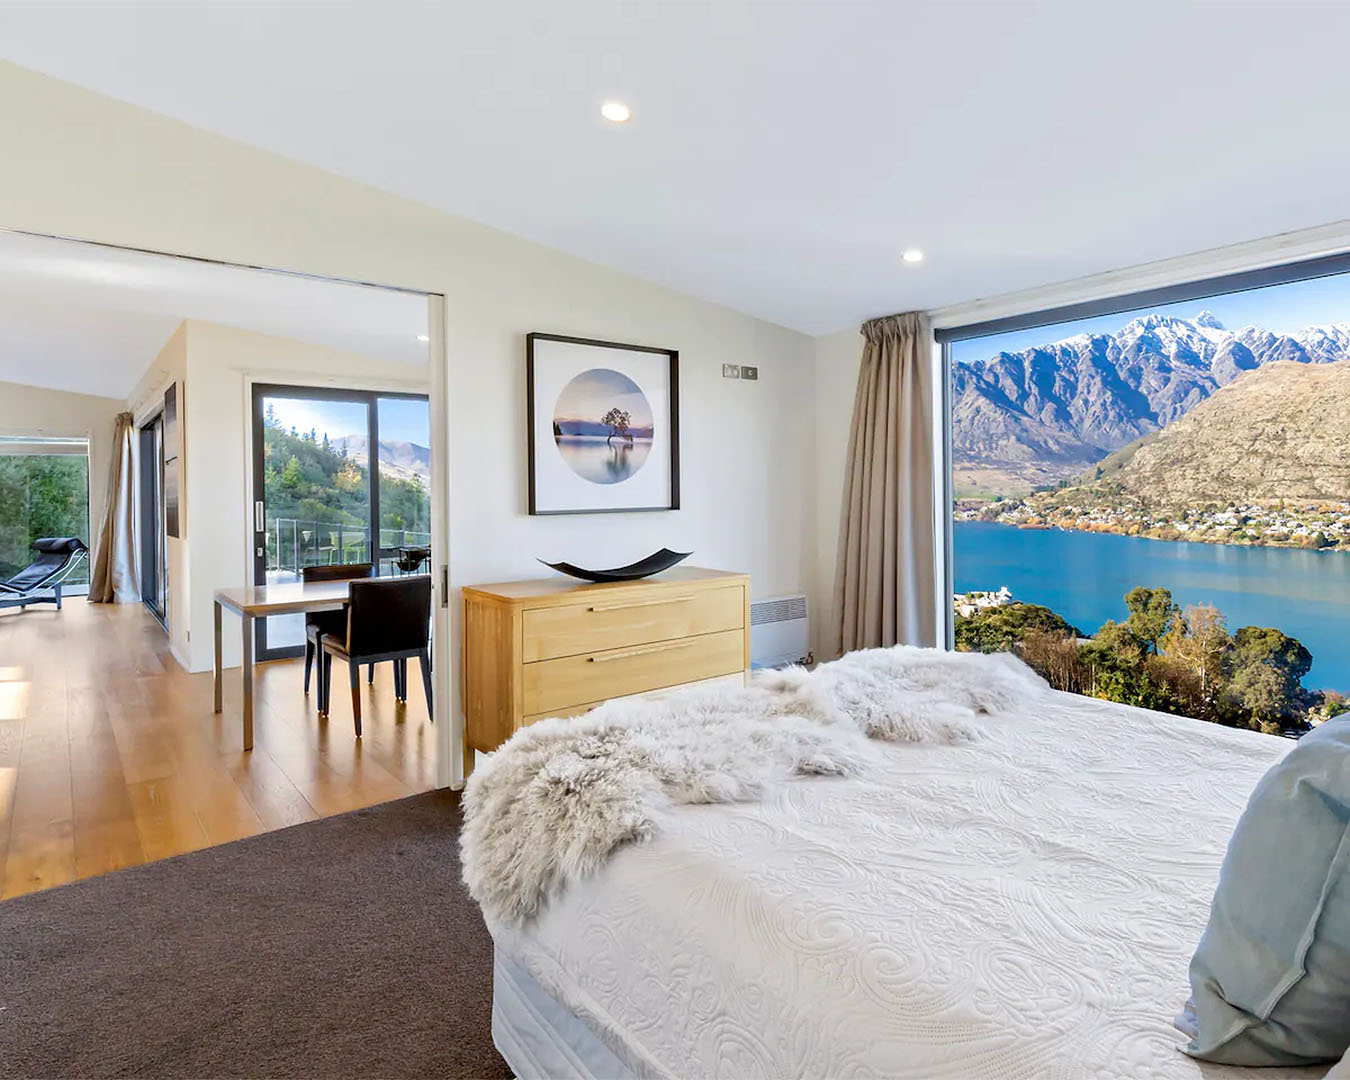 A cosy bedroom and living area looks out over lake Wakatipu, one of the best airbnbs with fireplaces in New Zealand.